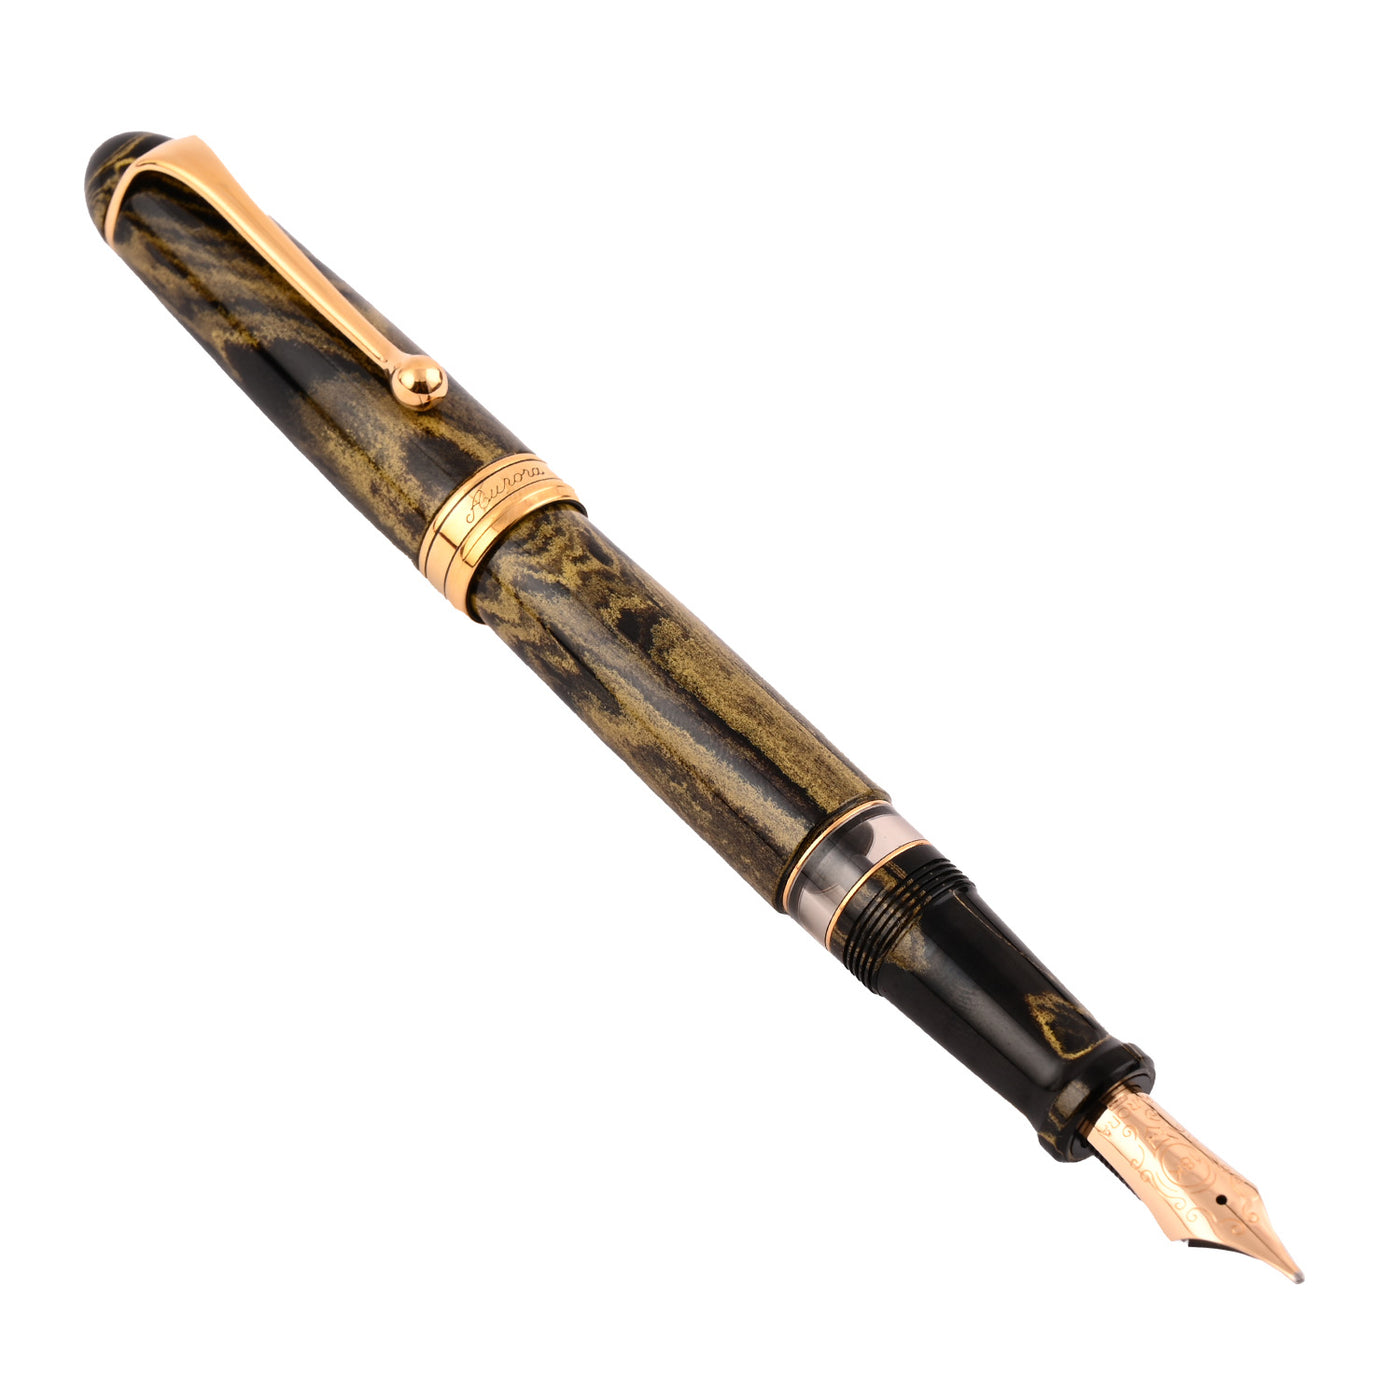 Aurora 88 Ebonite Fountain Pen - Marbled Yellow GT (Limited Edition) 5